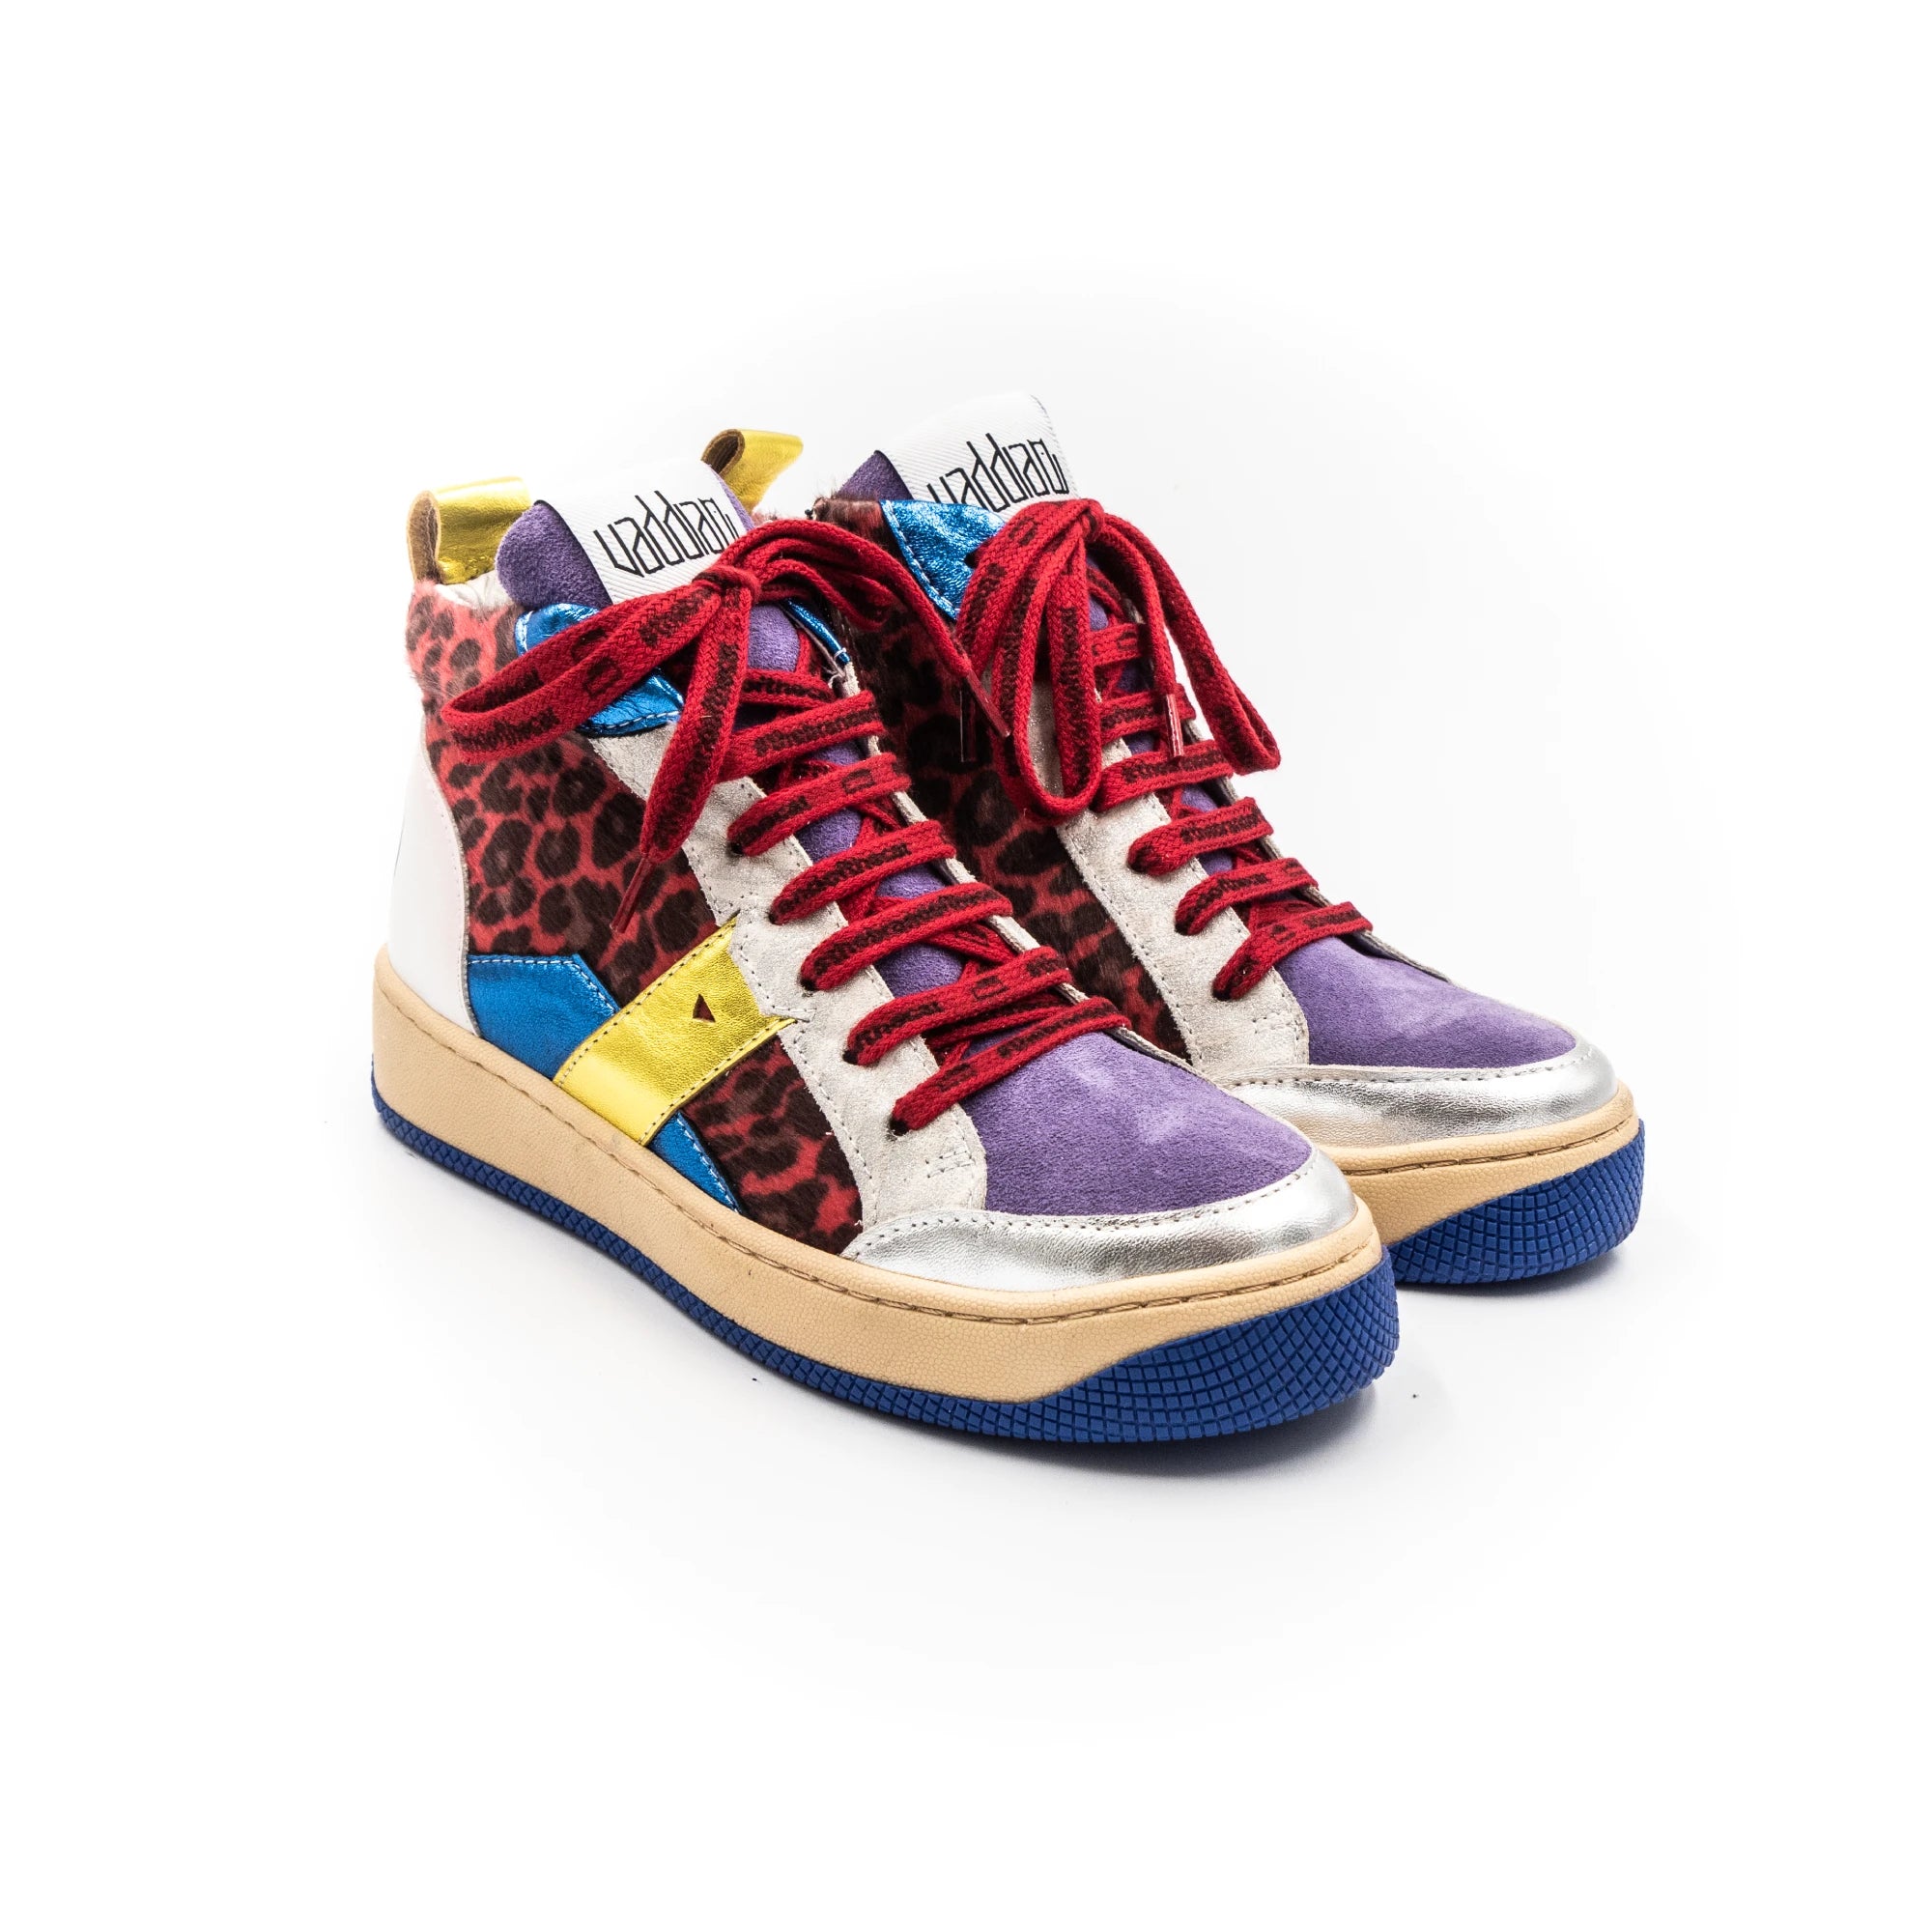 High-top sneakers in different colors.